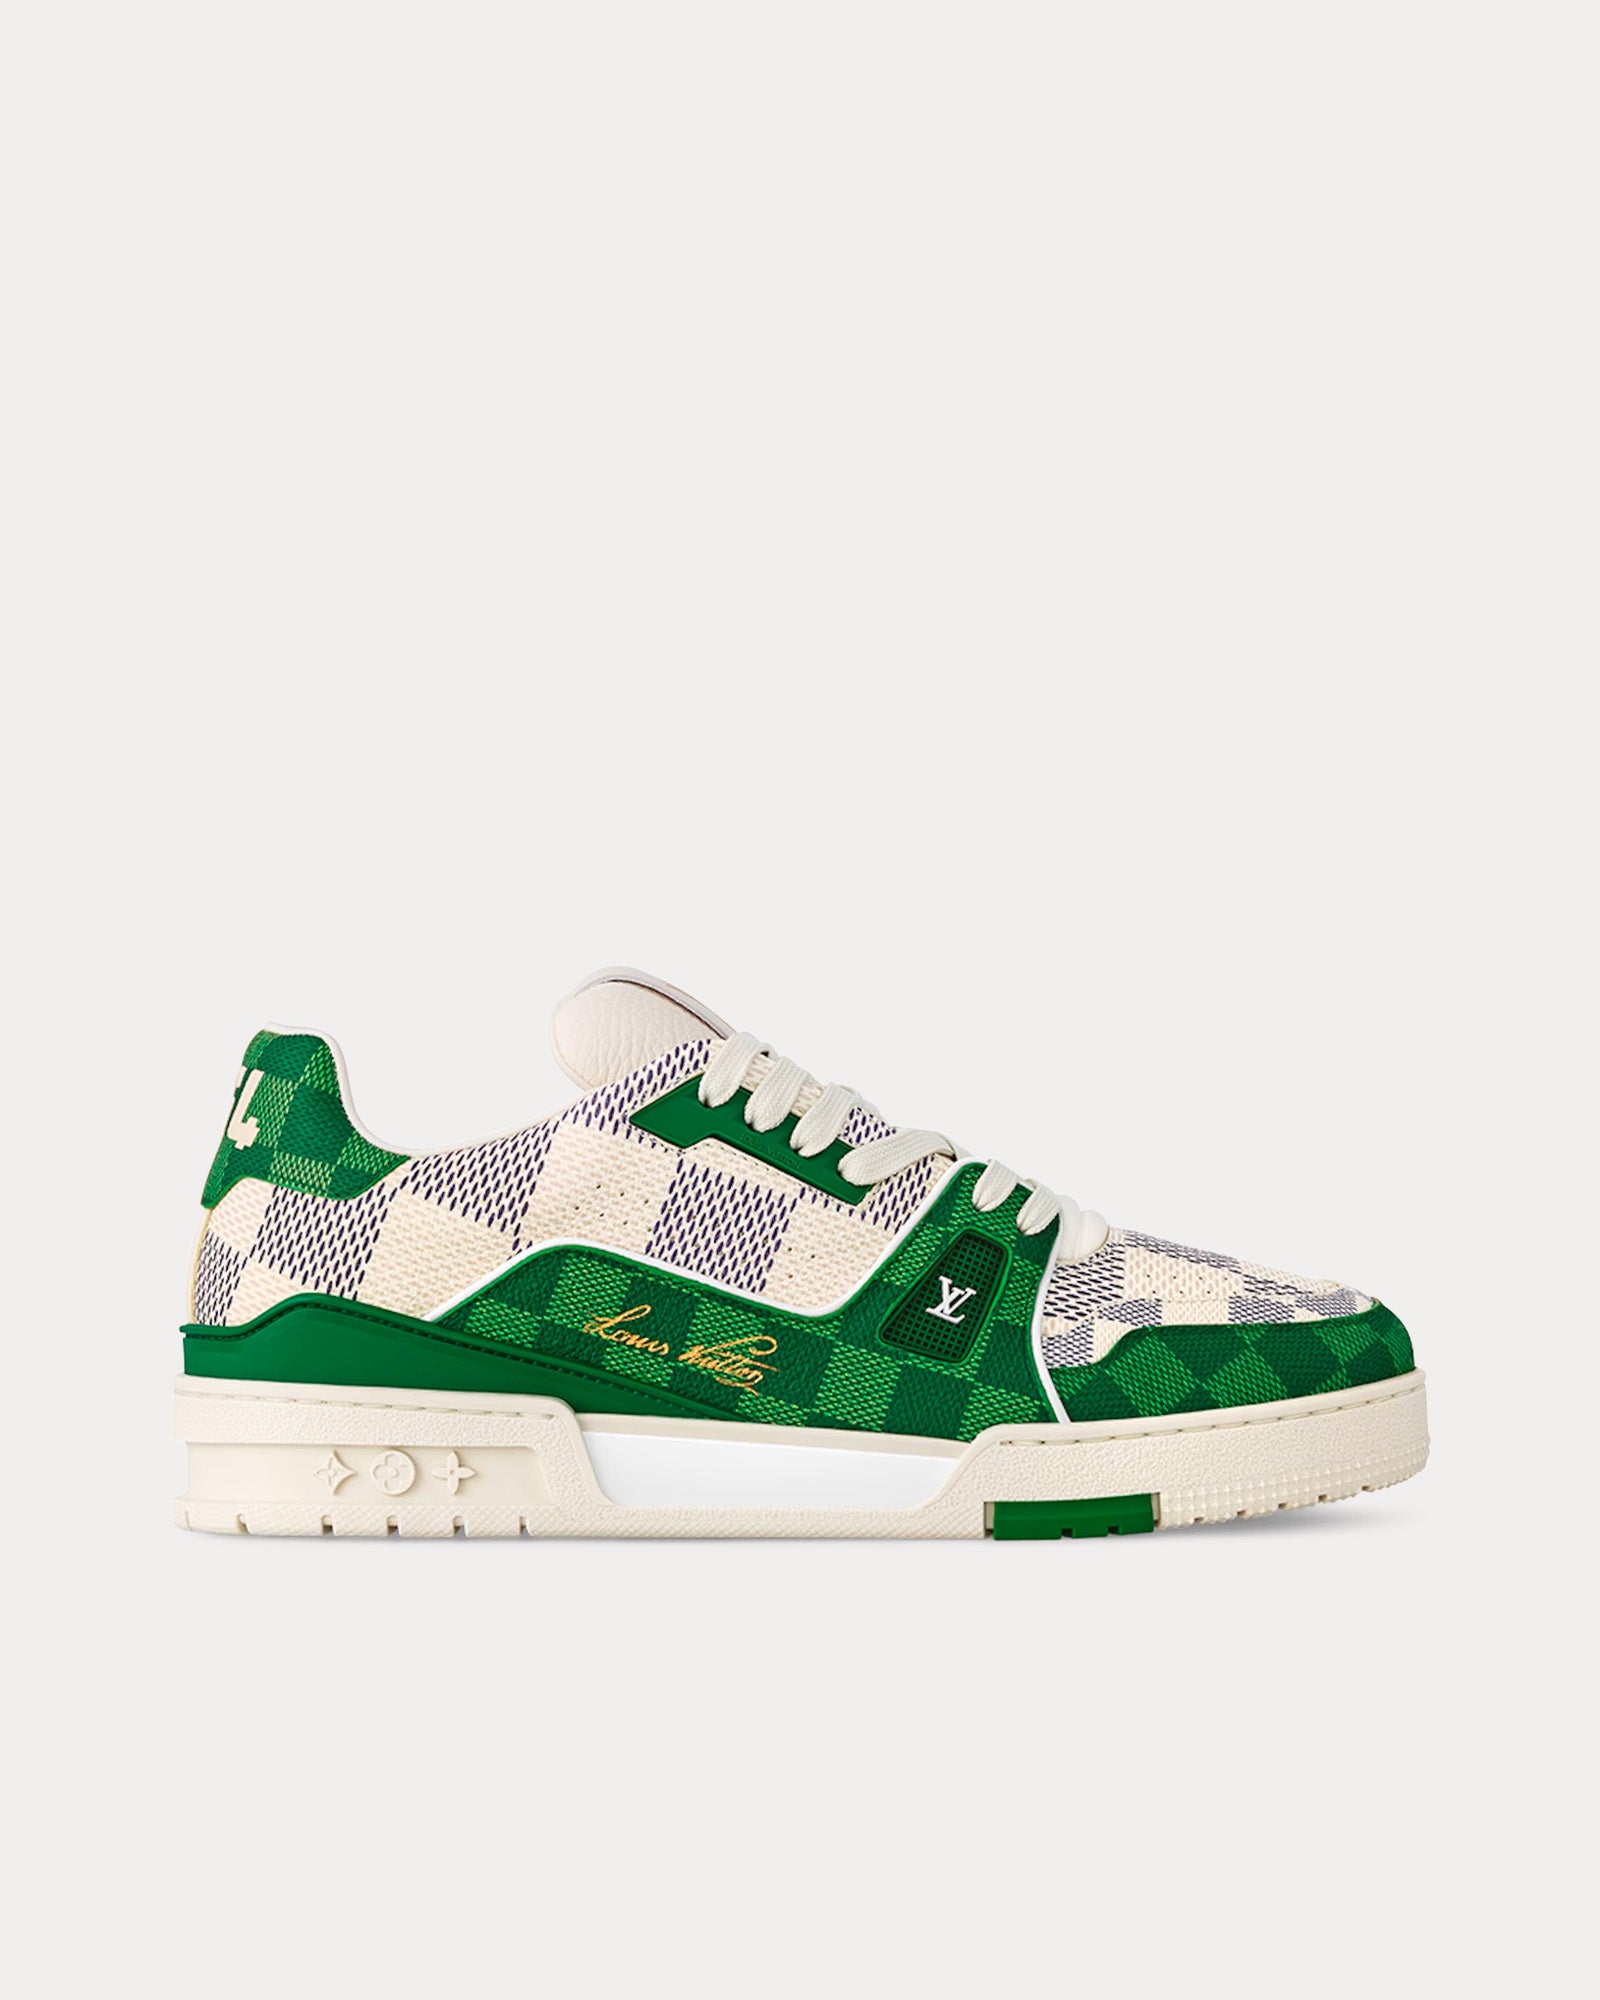 Louis Vuitton LV Trainers Damier Grained Calf Leather Green Low